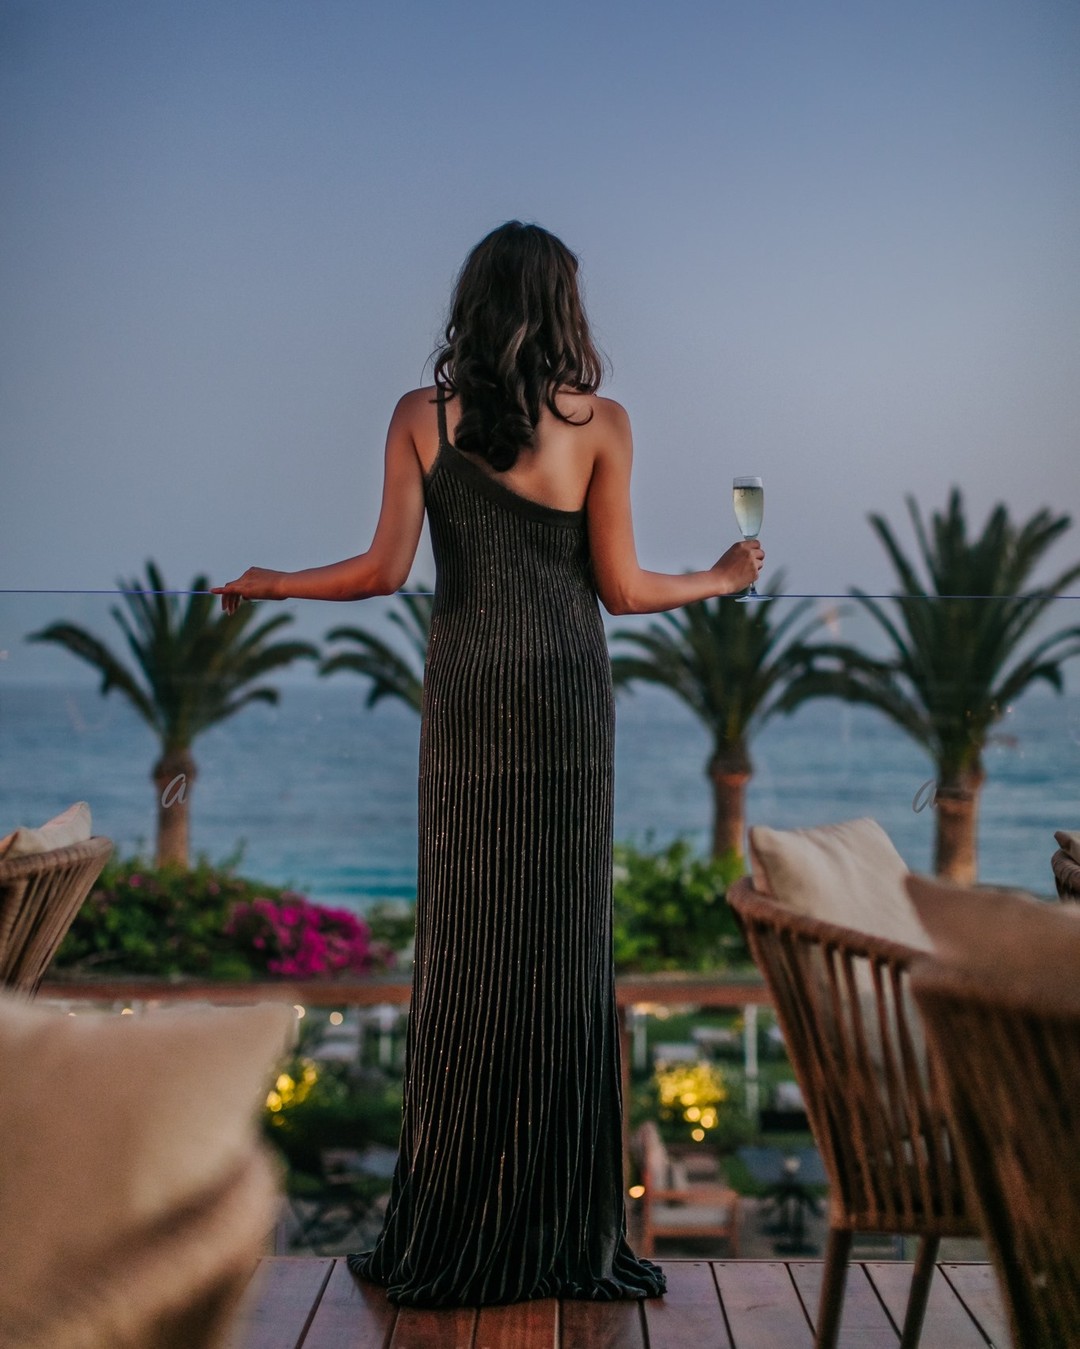 With panoramic sea view and a glass of champagne, the evening begins with magic at The Deck by Alion